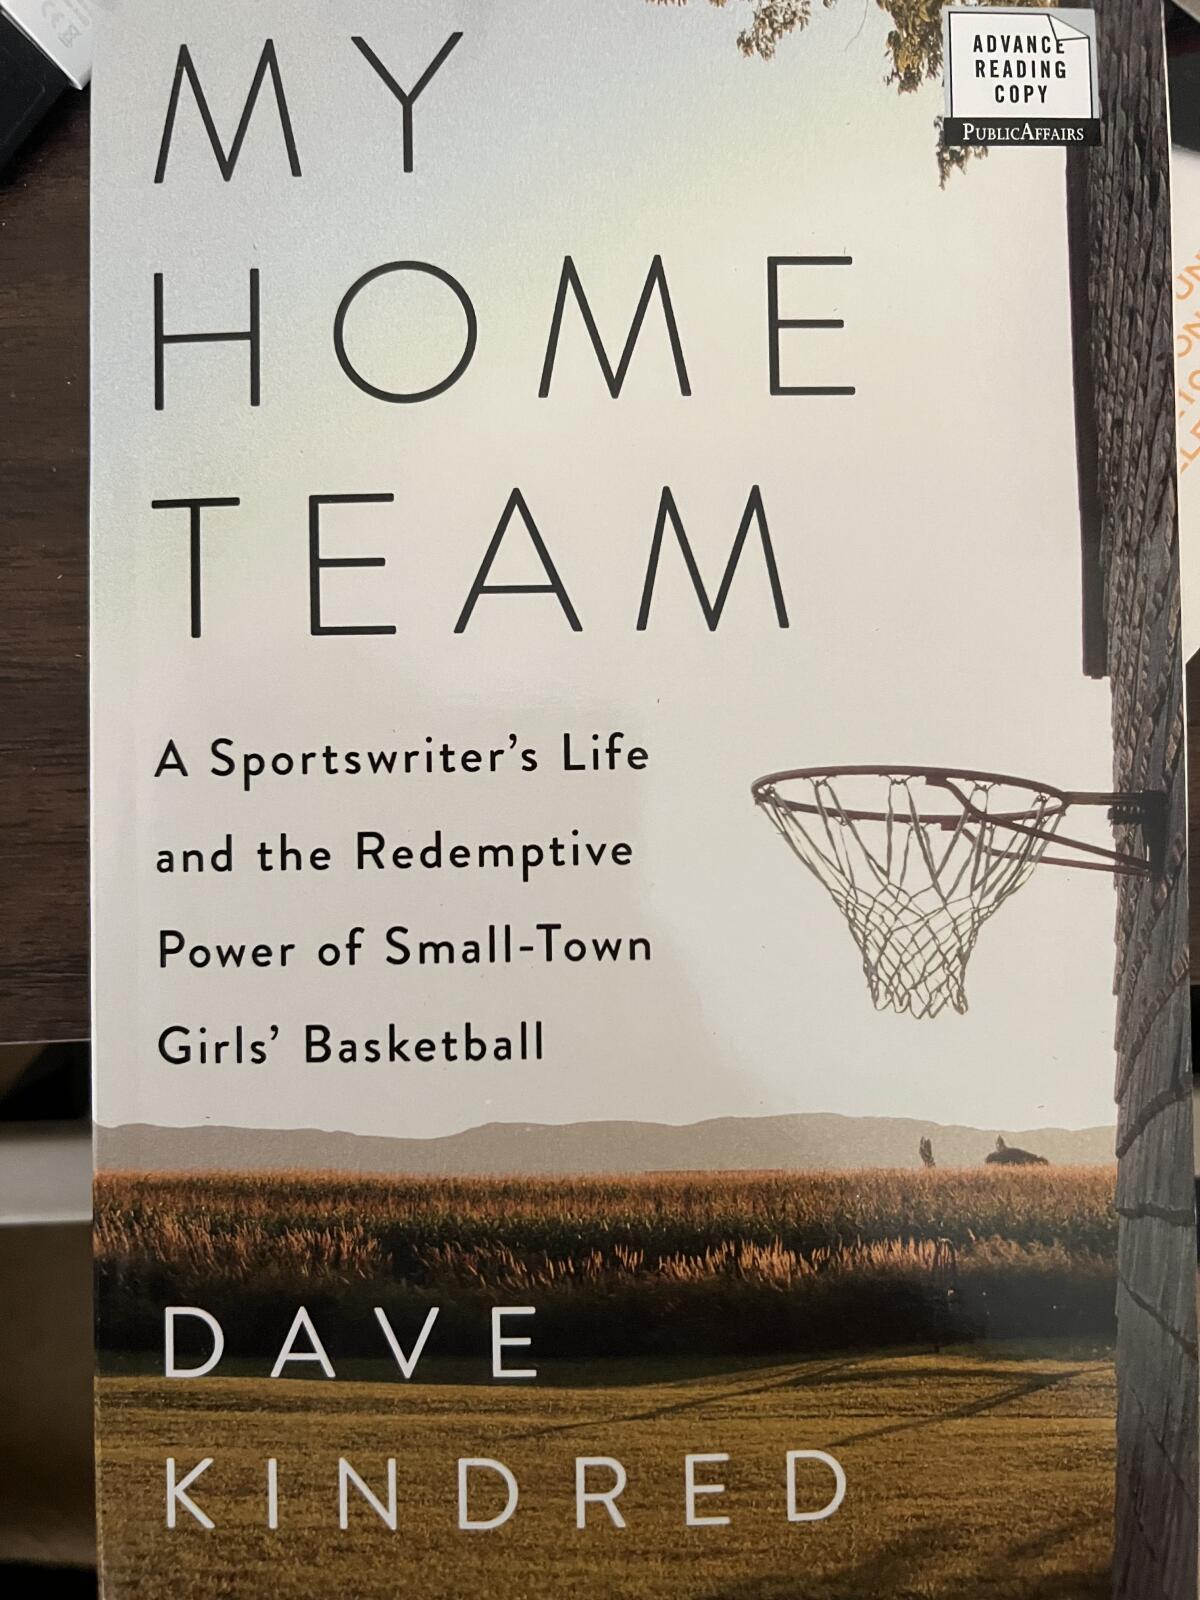 Dave Kindred's new book scheduled to be published in September.